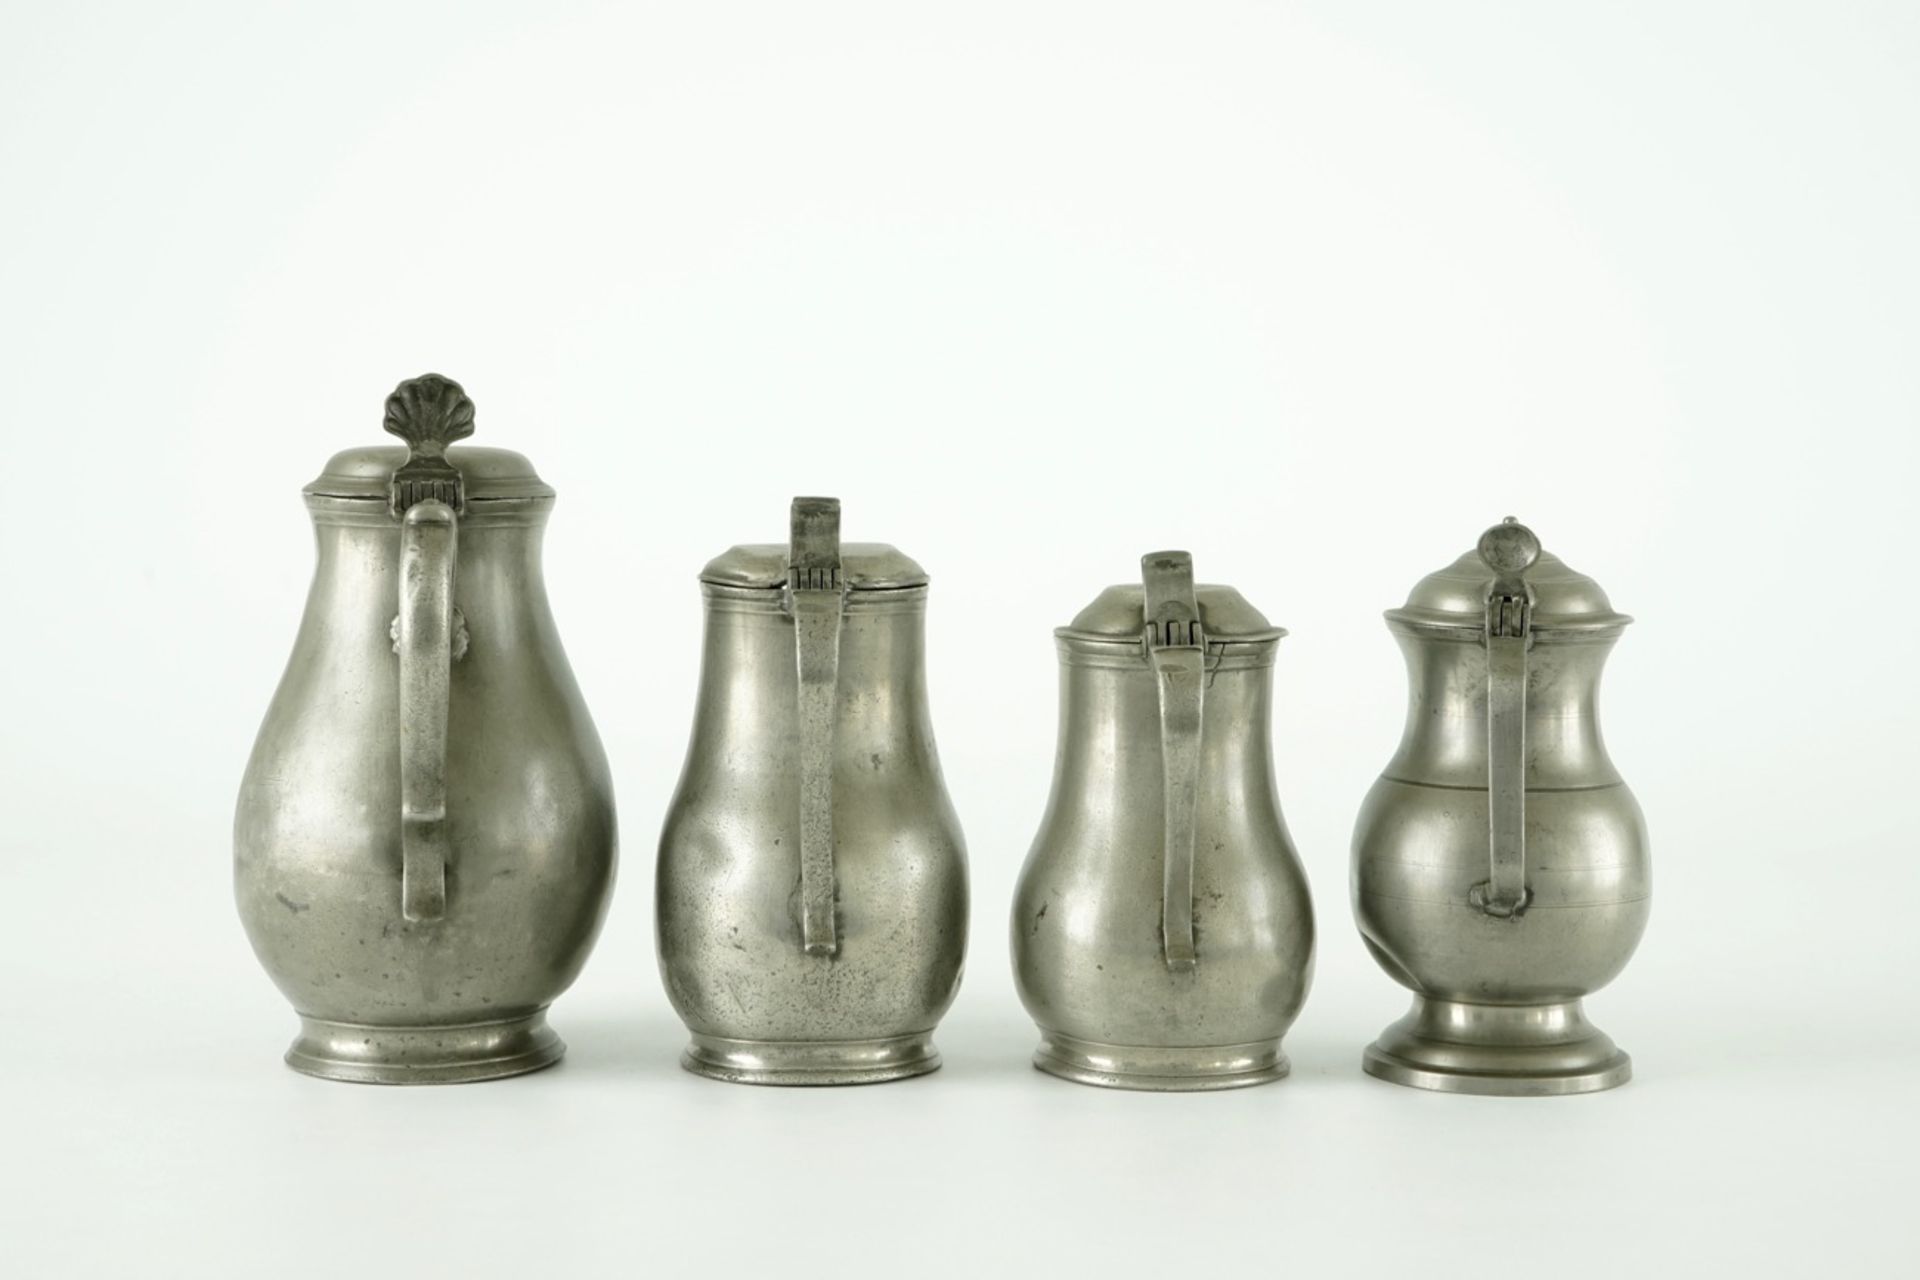 A collection of pewter wares, consisting of 20 jugs, plates, trays and bowls, 17/19th C. - Image 3 of 23